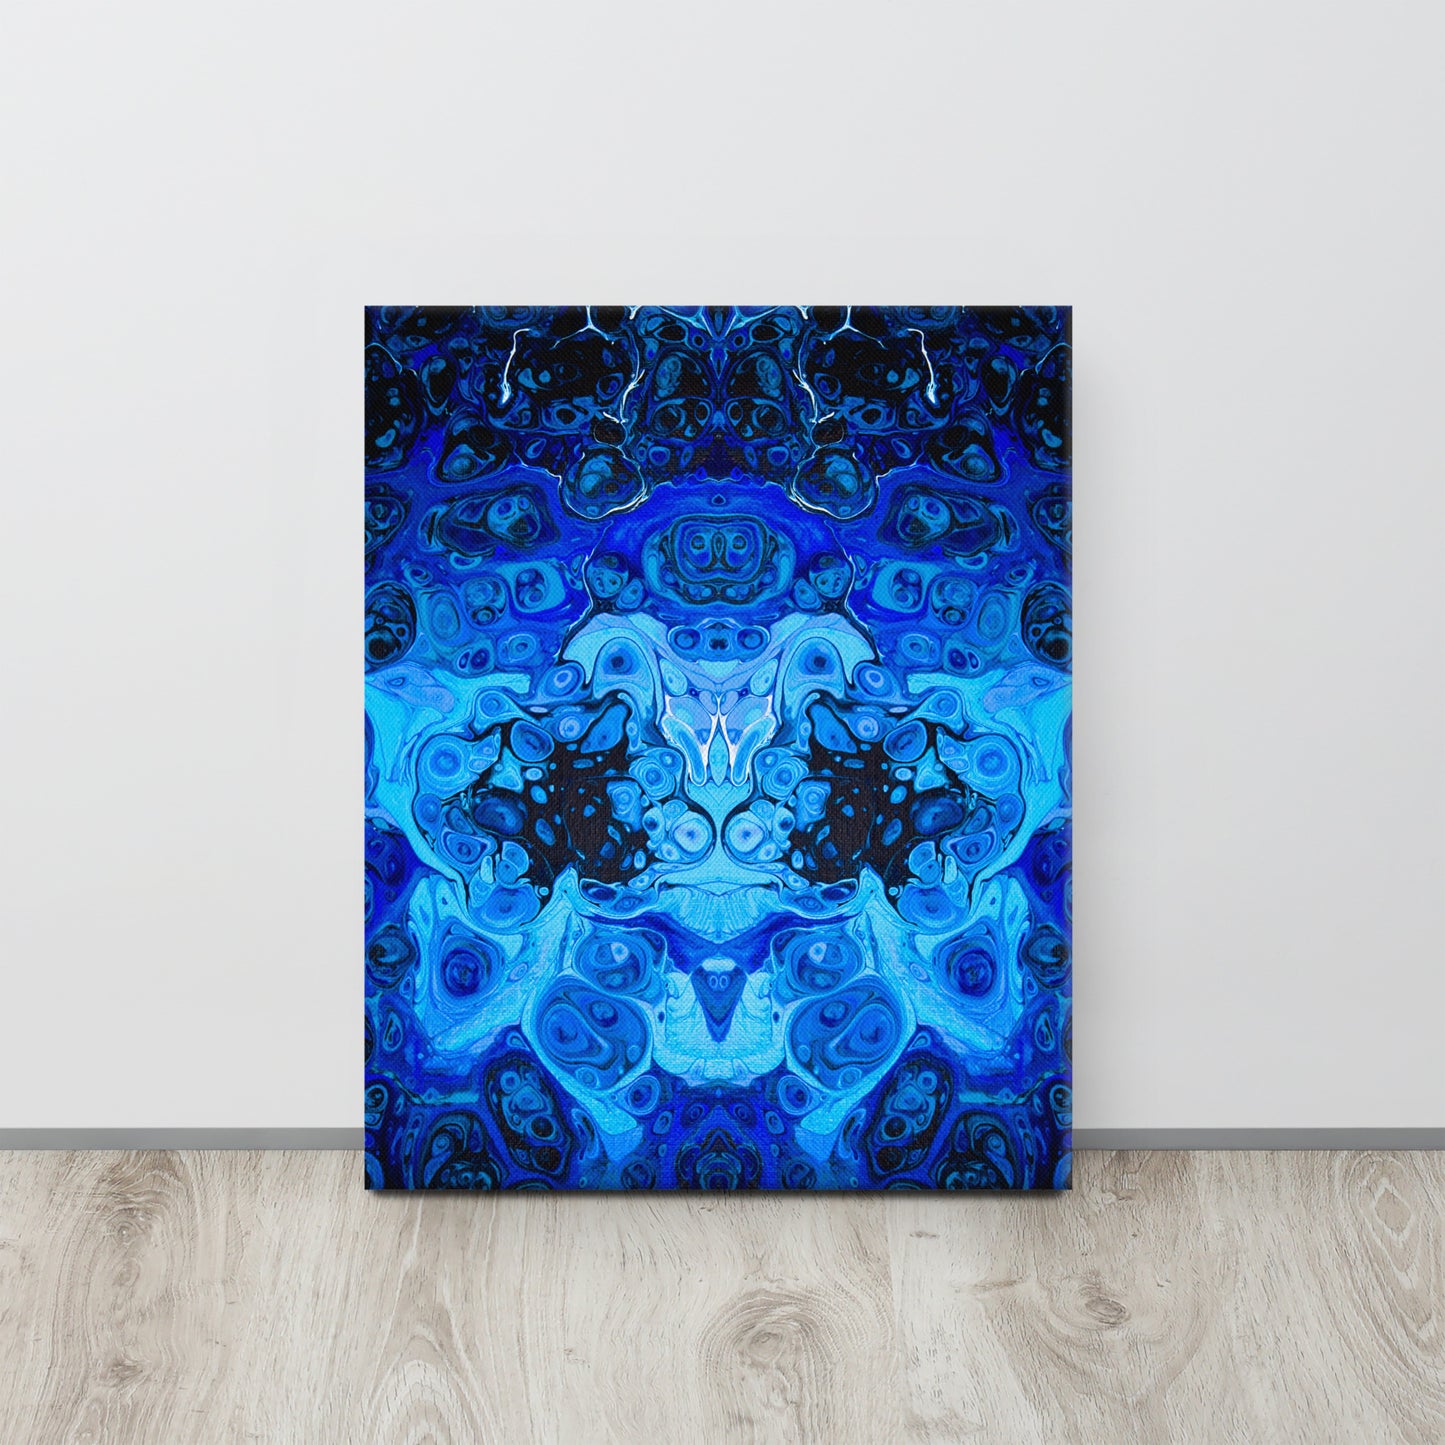 NightOwl Studio Abstract Wall Art, Blue Bliss, Boho Living Room, Bedroom, Office, and Home Decor, Premium Canvas with Wooden Frame, Acrylic Painting Reproduction, 16” x 20”